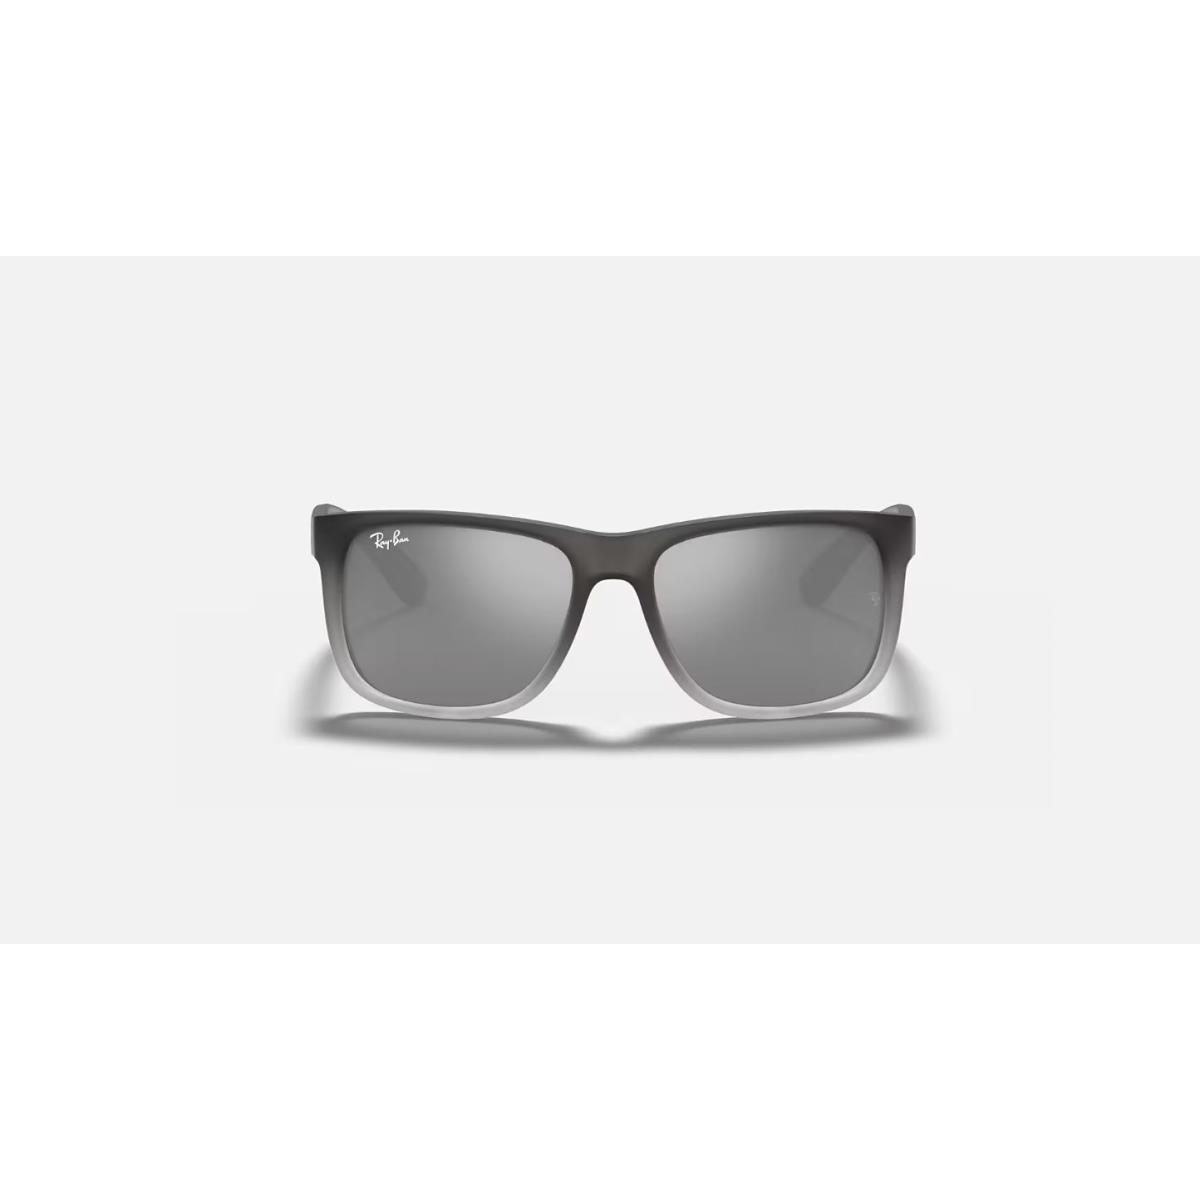 Ray-ban Justin Classic Grey/silver Mirror Gradient 54mm Sunglasses RB4165 852/88 - Frame: Grey, Lens: Silver Mirror